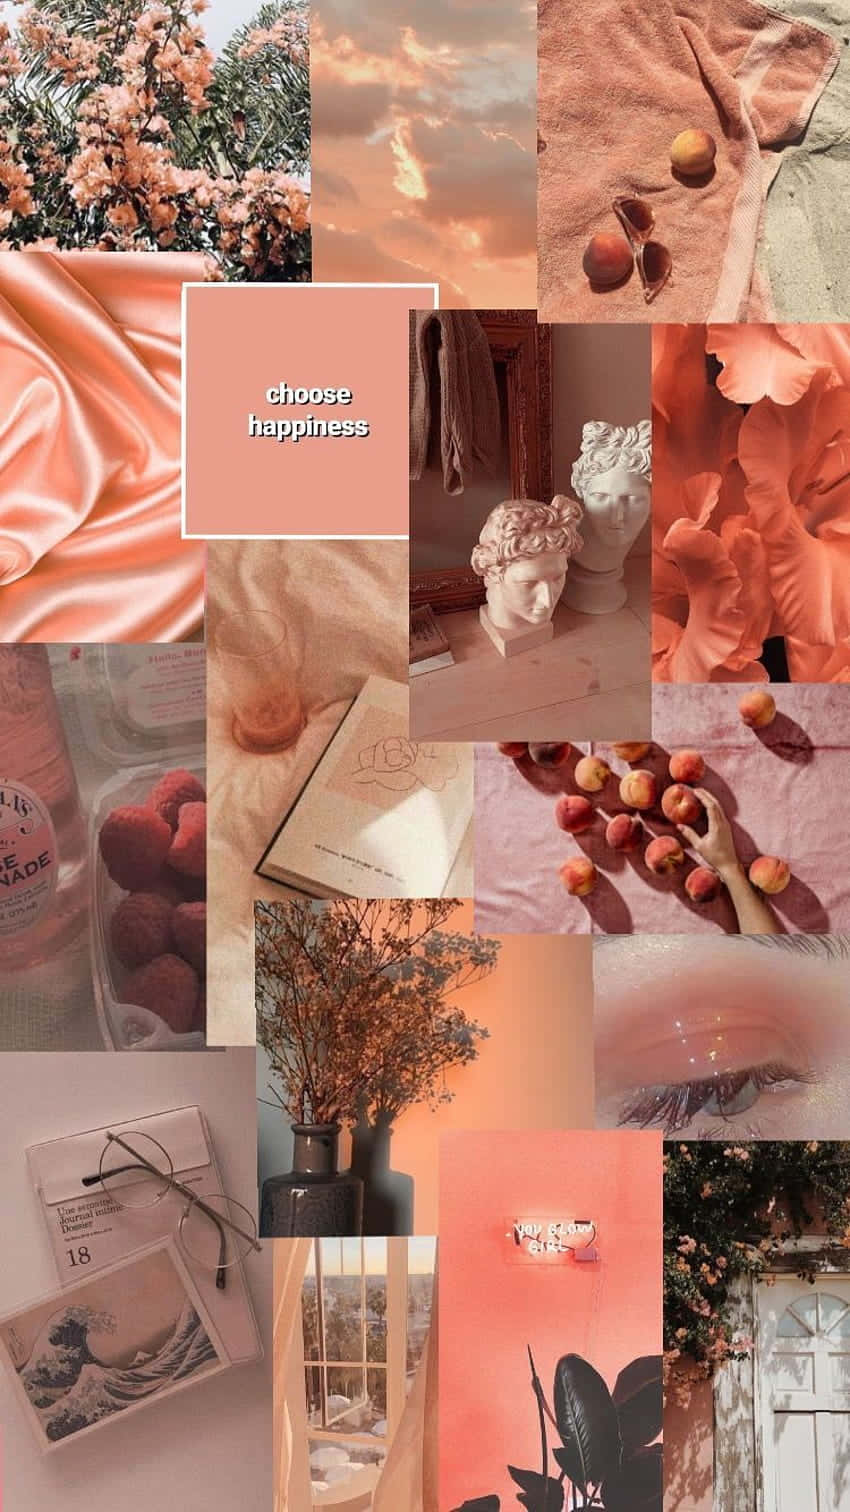 A Collage Of Pictures Of Peach And Orange Wallpaper